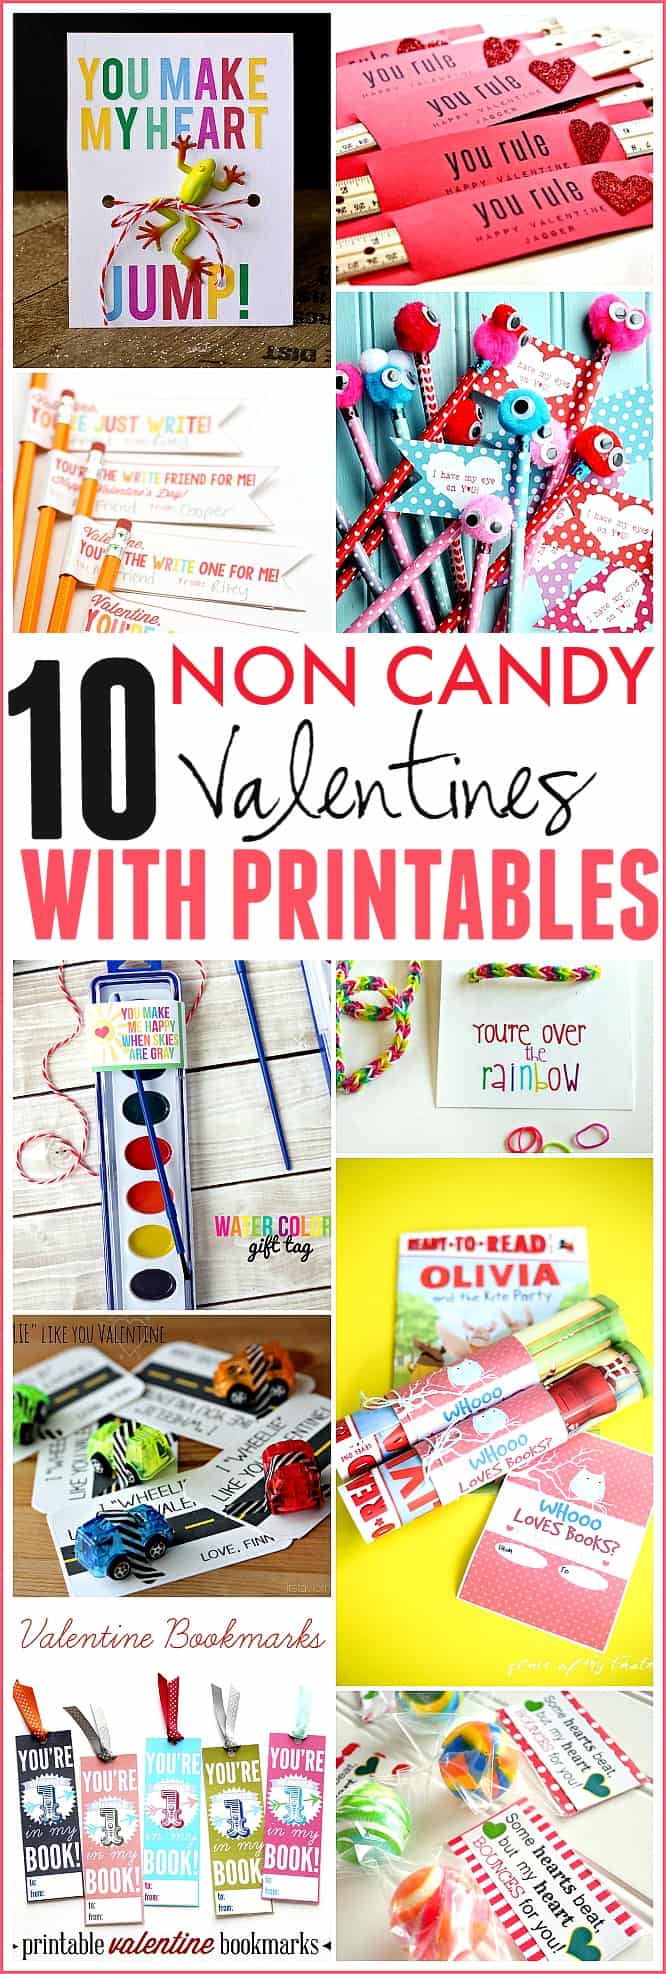 10 NON CANDY VALENTINES WITH PRINTABLES